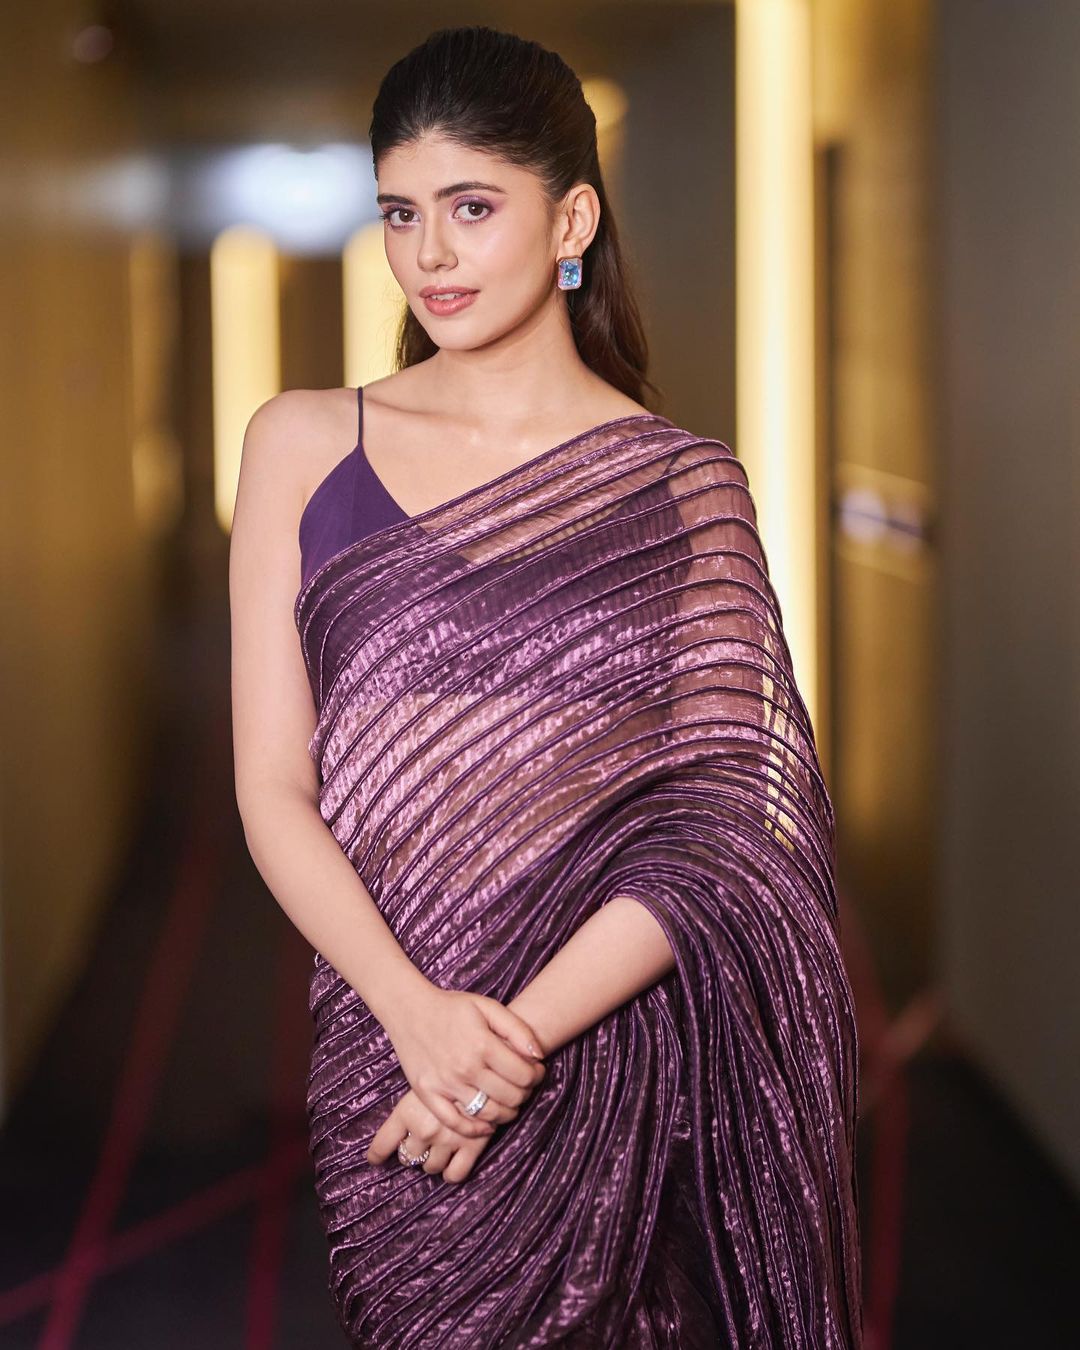 Actress sanjana sanghi spells magic with her stylish images-Actresssanjana, Sanjana Sanghi, Sanjanasanghi Photos,Spicy Hot Pics,Images,High Resolution WallPapers Download